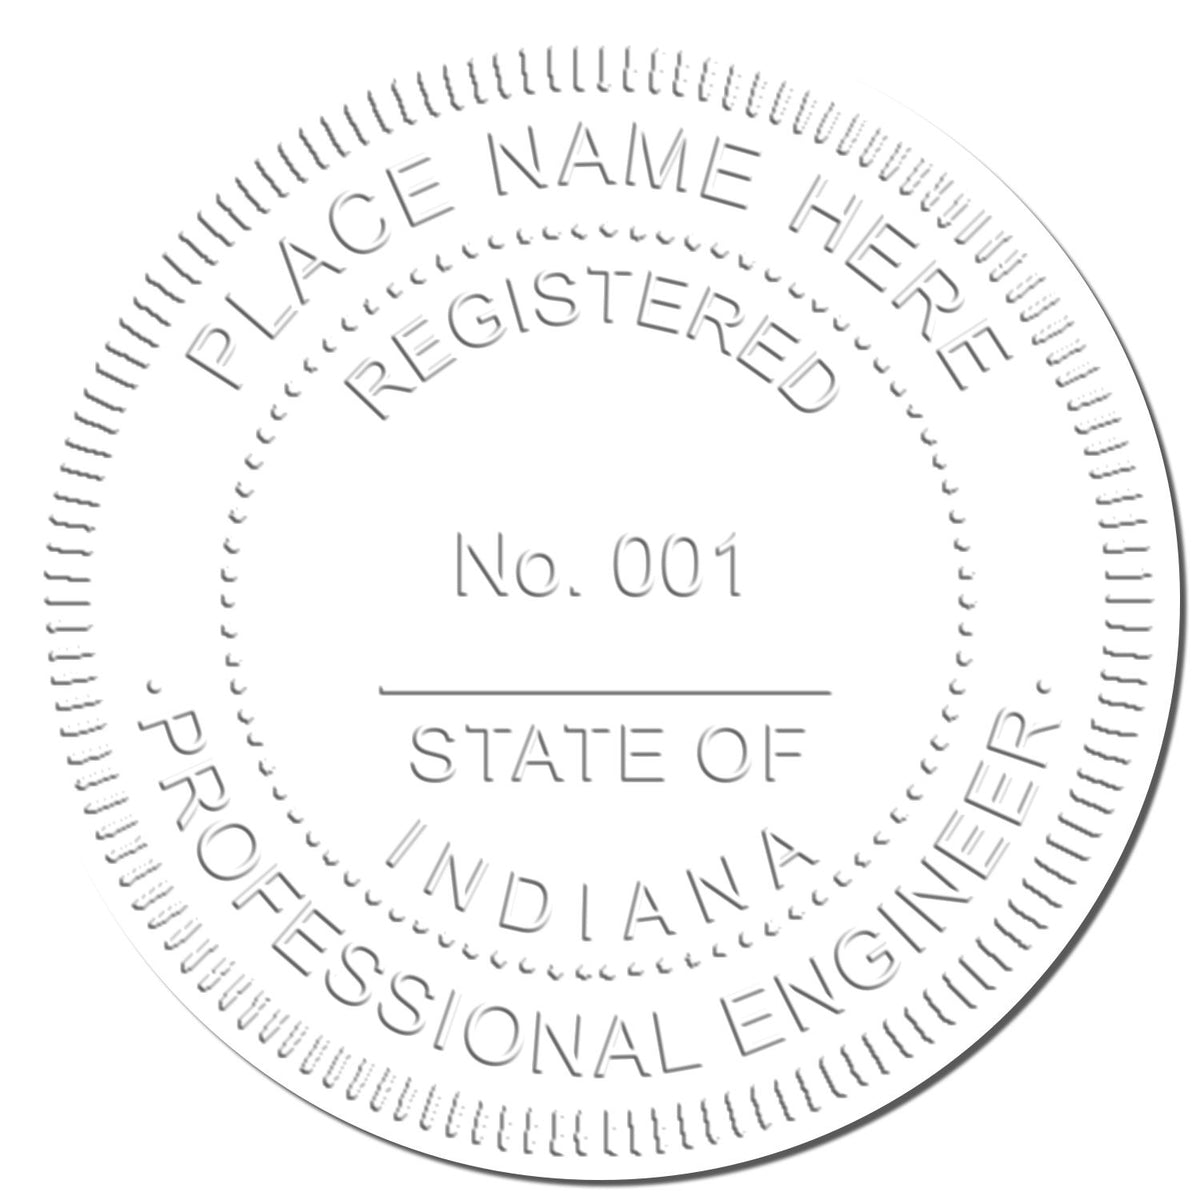 This paper is stamped with a sample imprint of the Gift Indiana Engineer Seal, signifying its quality and reliability.